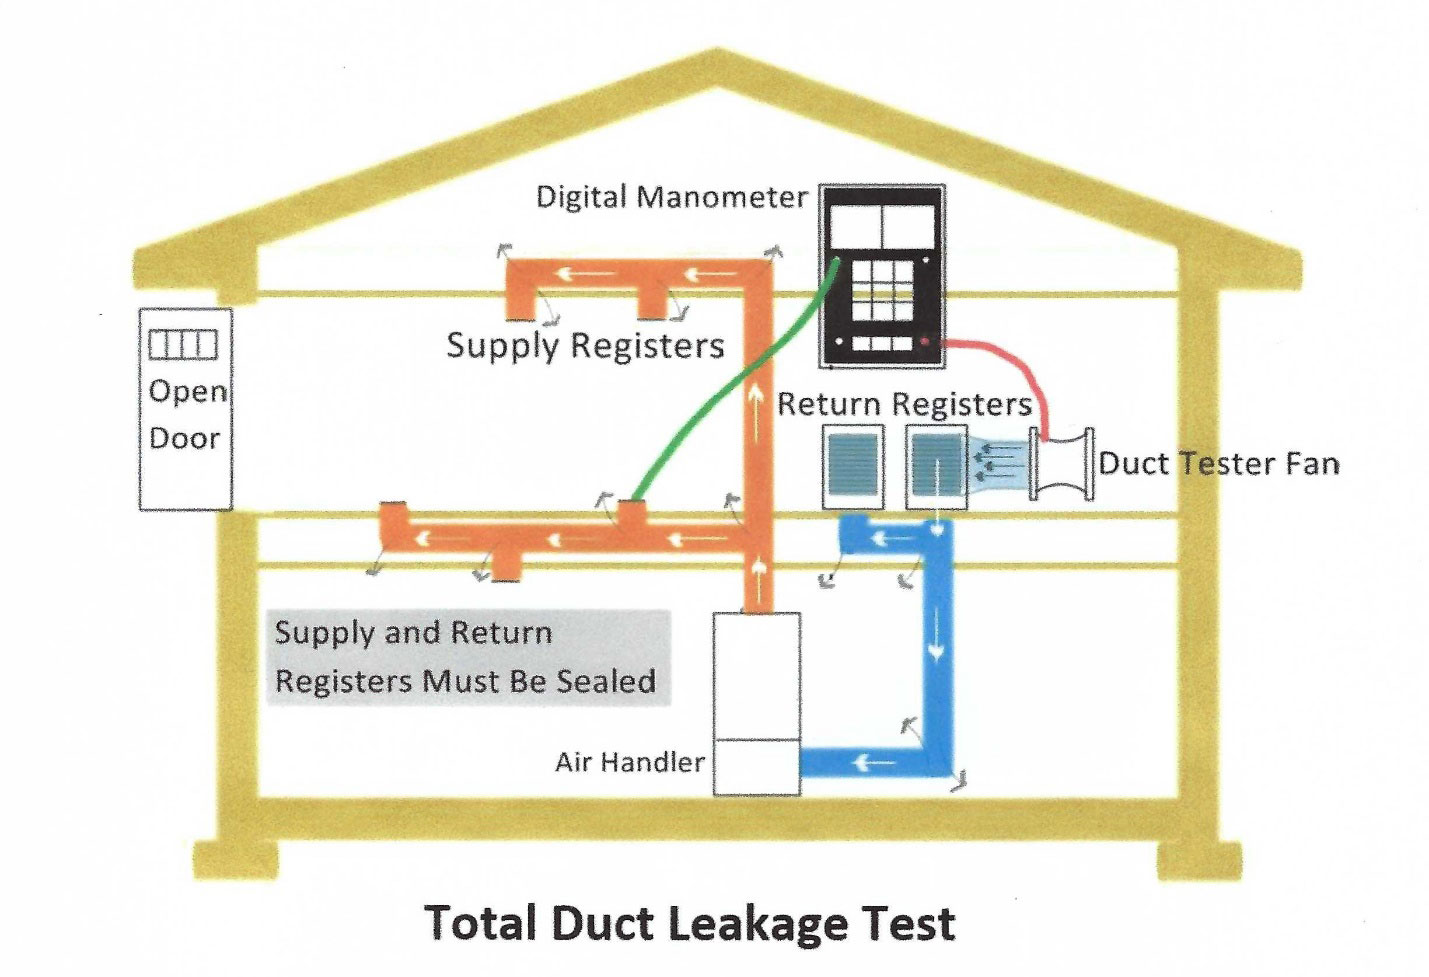 Total Duct Leakage Test